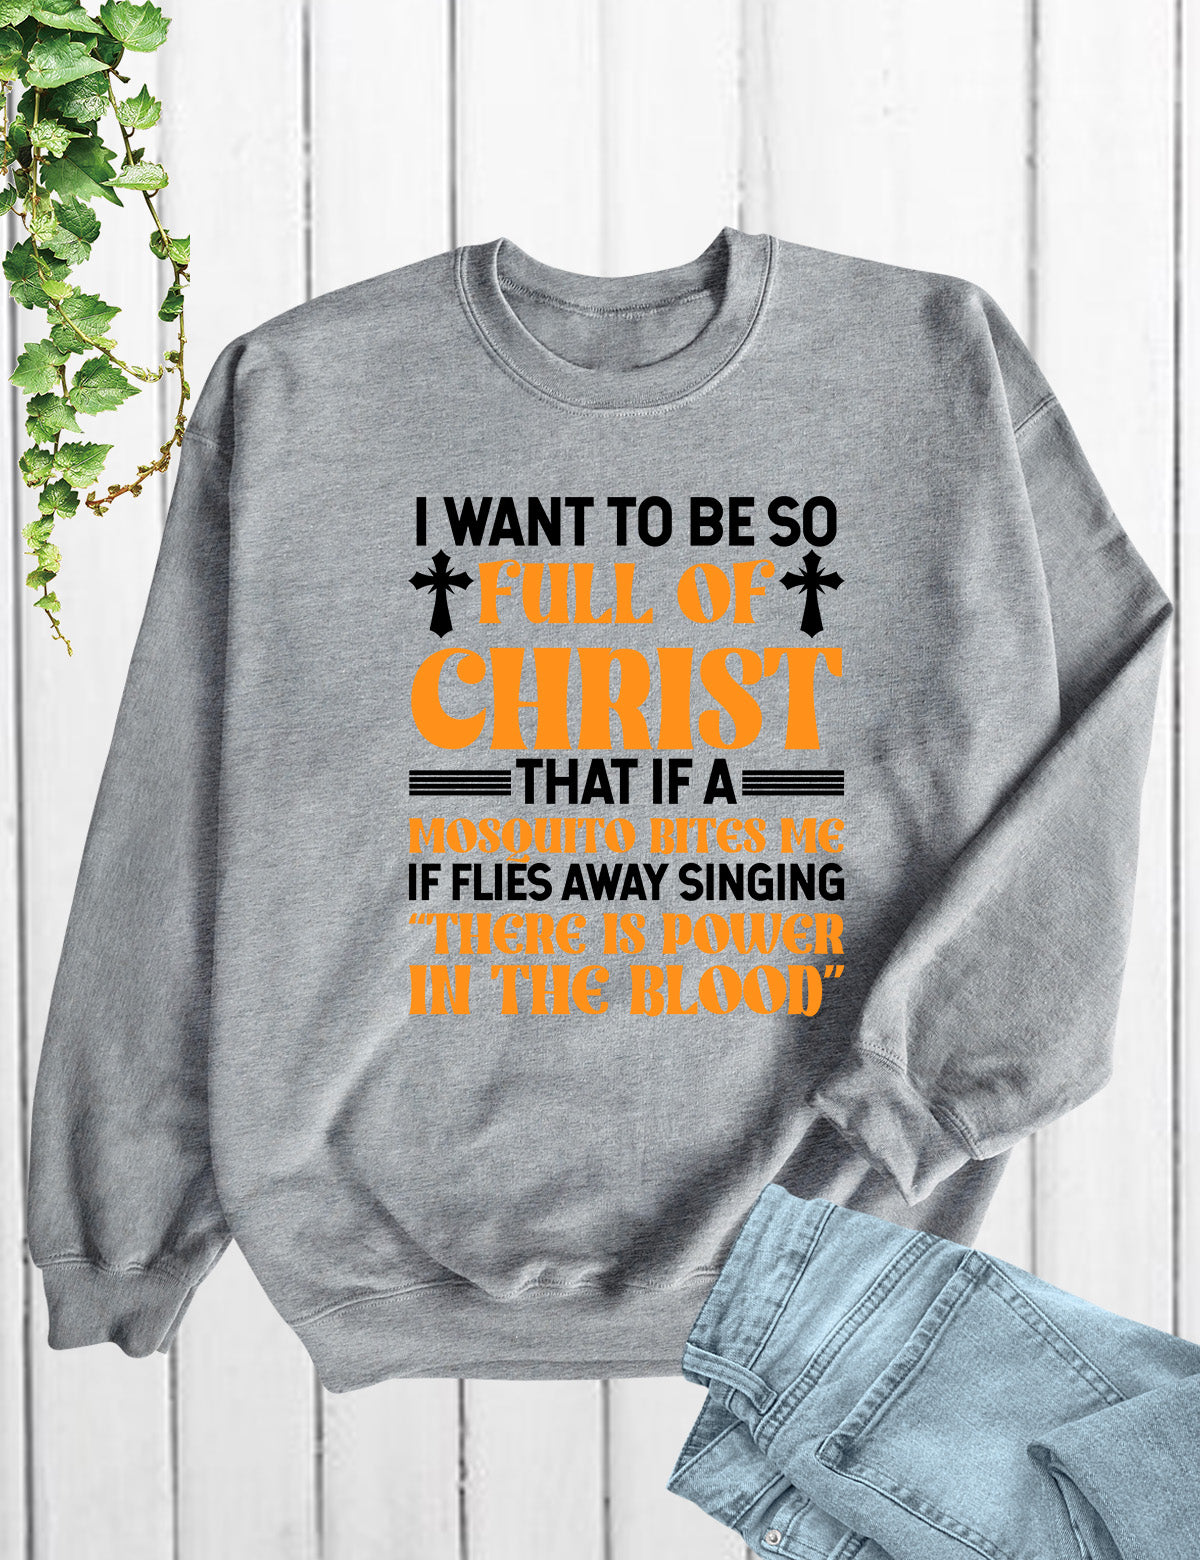 I Want To Be So Full Of Christ Power in The Blood Sweatshirts